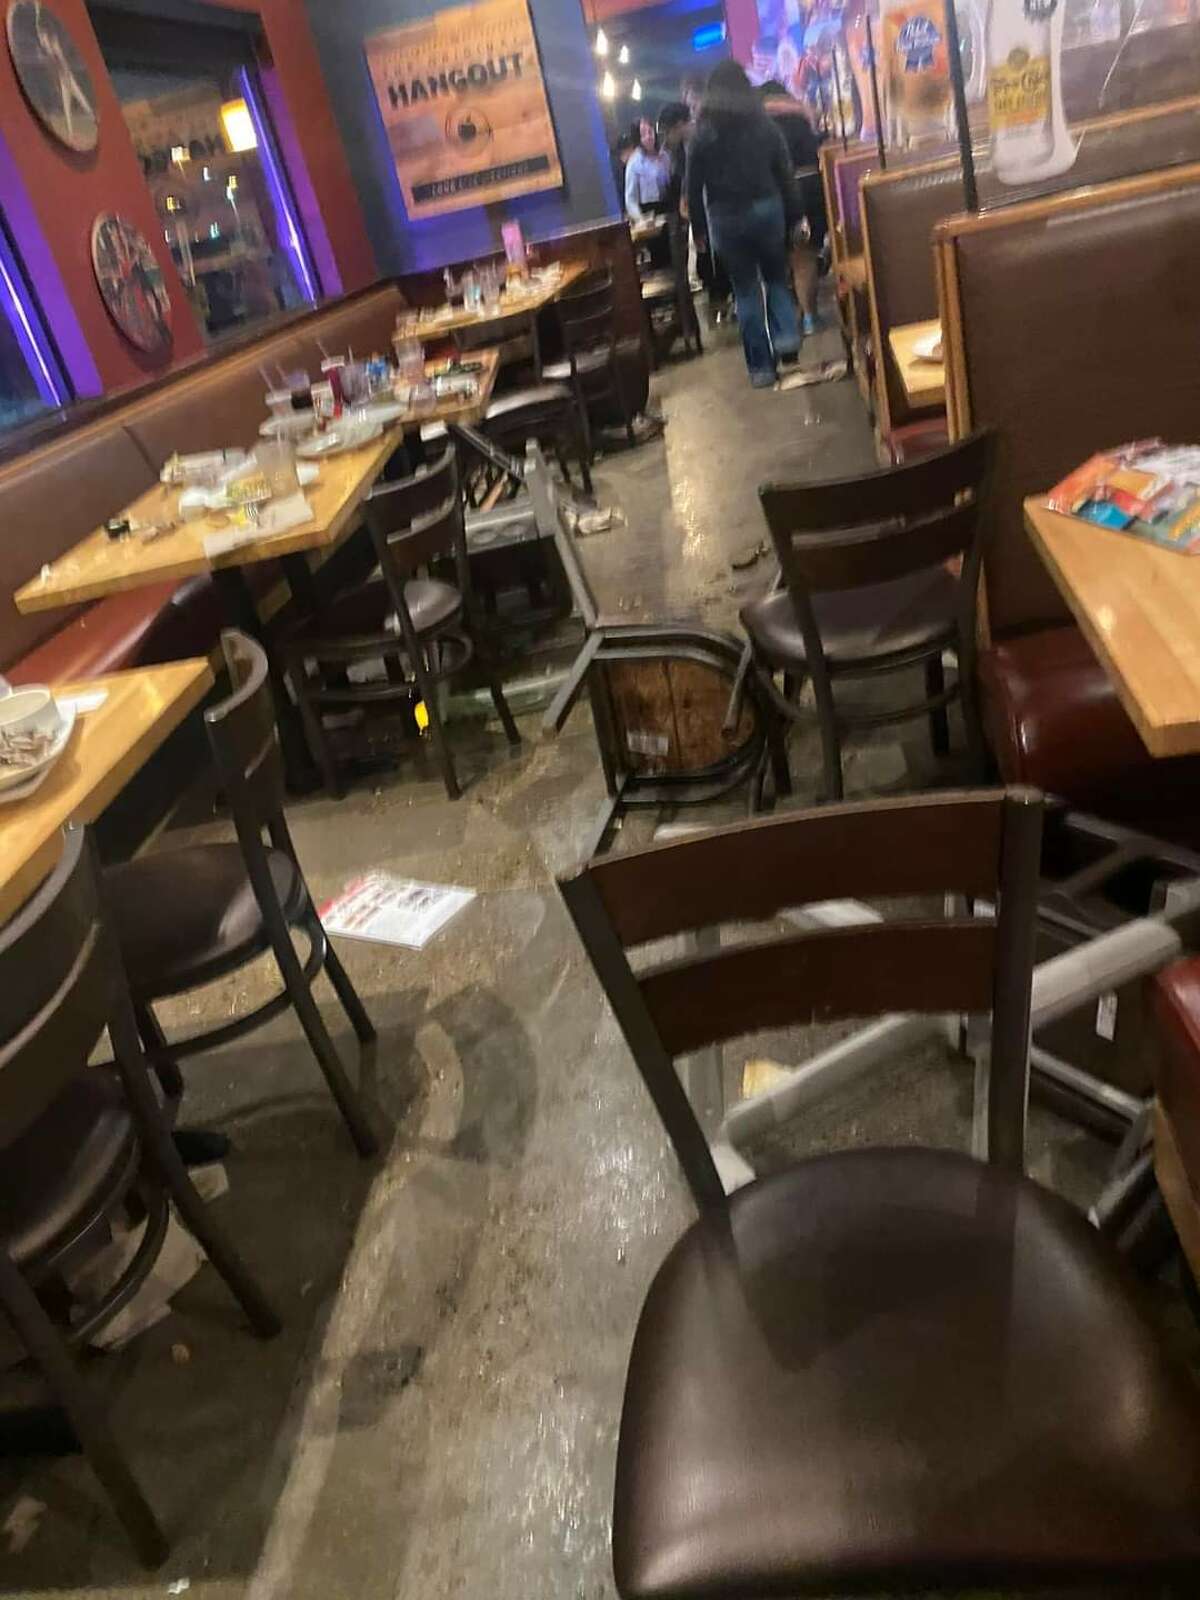 Pictured are photographs allegedly taken after a bar fight at Applebee's at the intersection of Bob Bullock Loop and International Drive on Friday, May 28, 2022. Unconfirmed reports and witness statements allege that a gunshot was fired inside the building, but LPD has so far said only that a bar fight occurred.